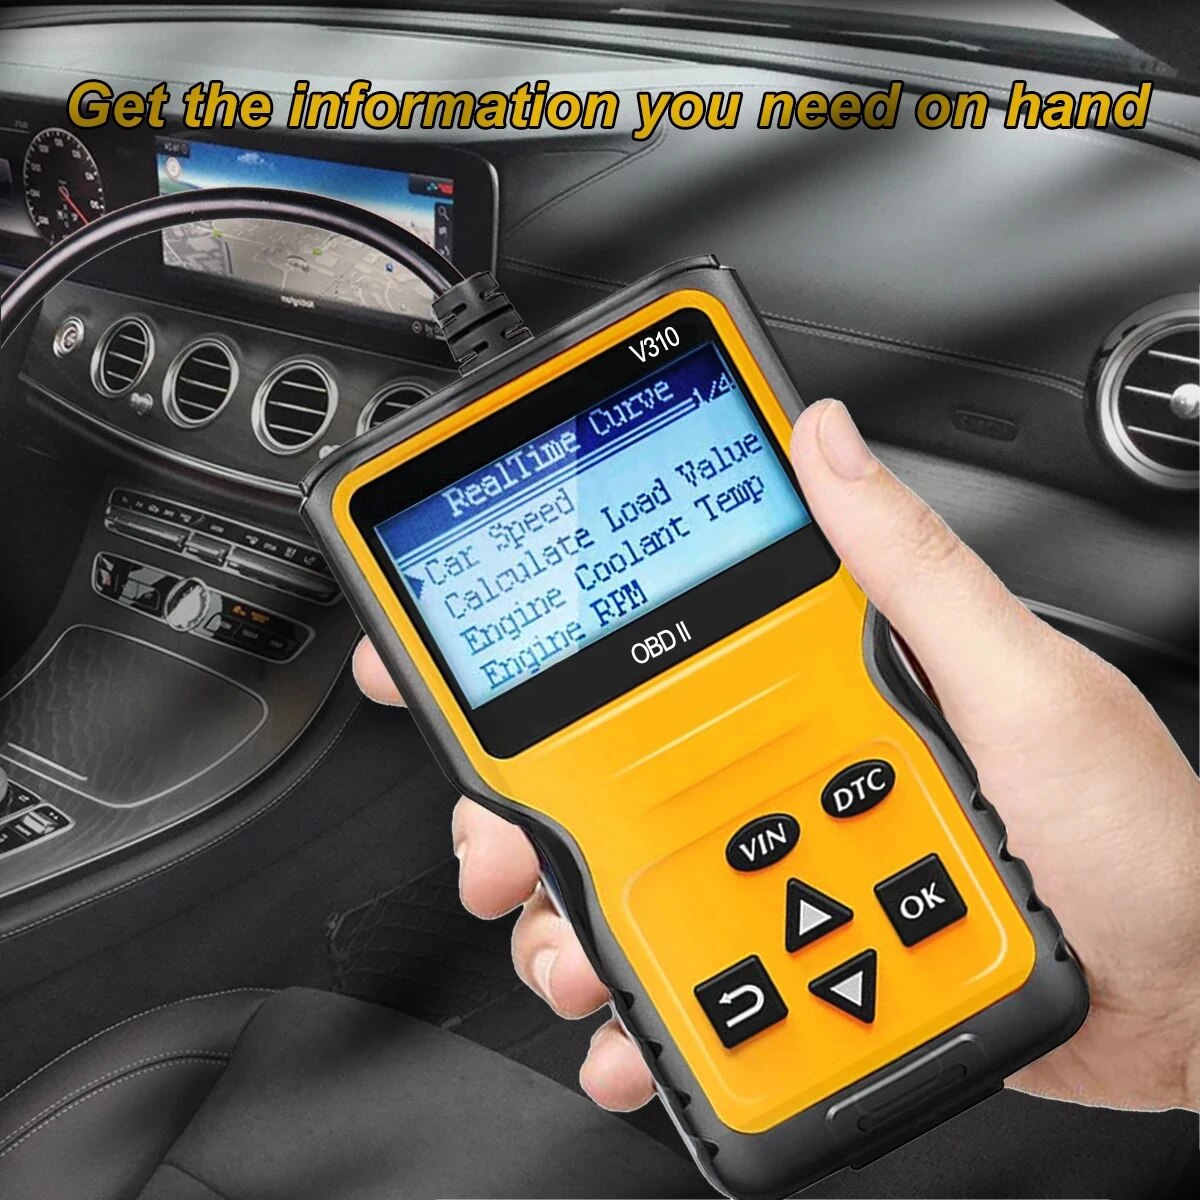 Cars OBD2 Scanner Universal Car Engine Fault Code Reader, CAN Diagnostic Scan OBDII Protocol Cars Professional Diagnosis Tools